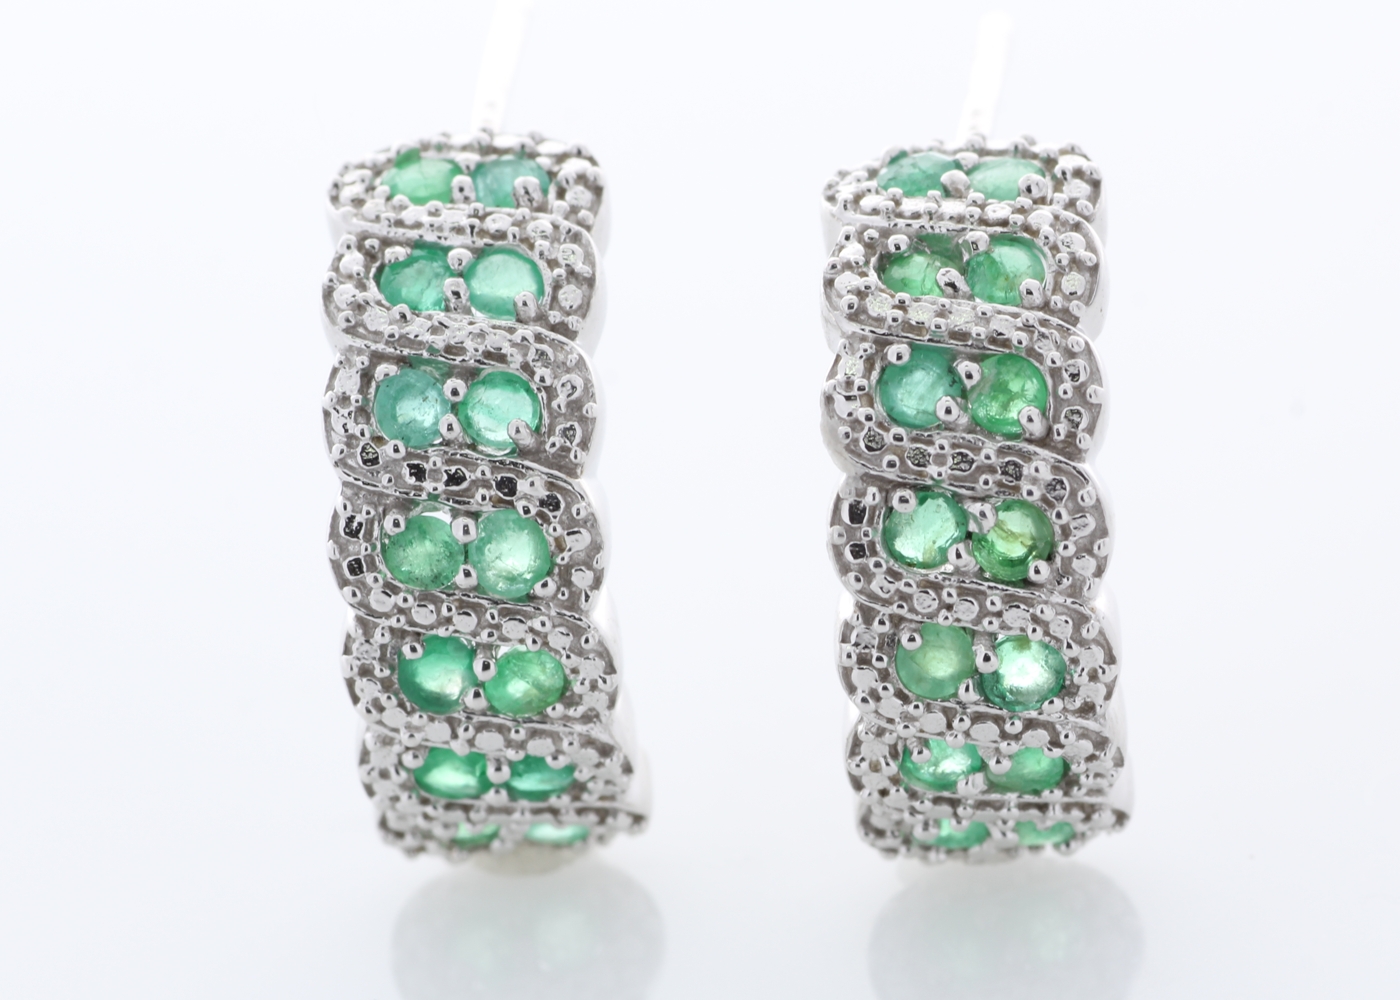 Silver Emerald Earring - Image 2 of 3